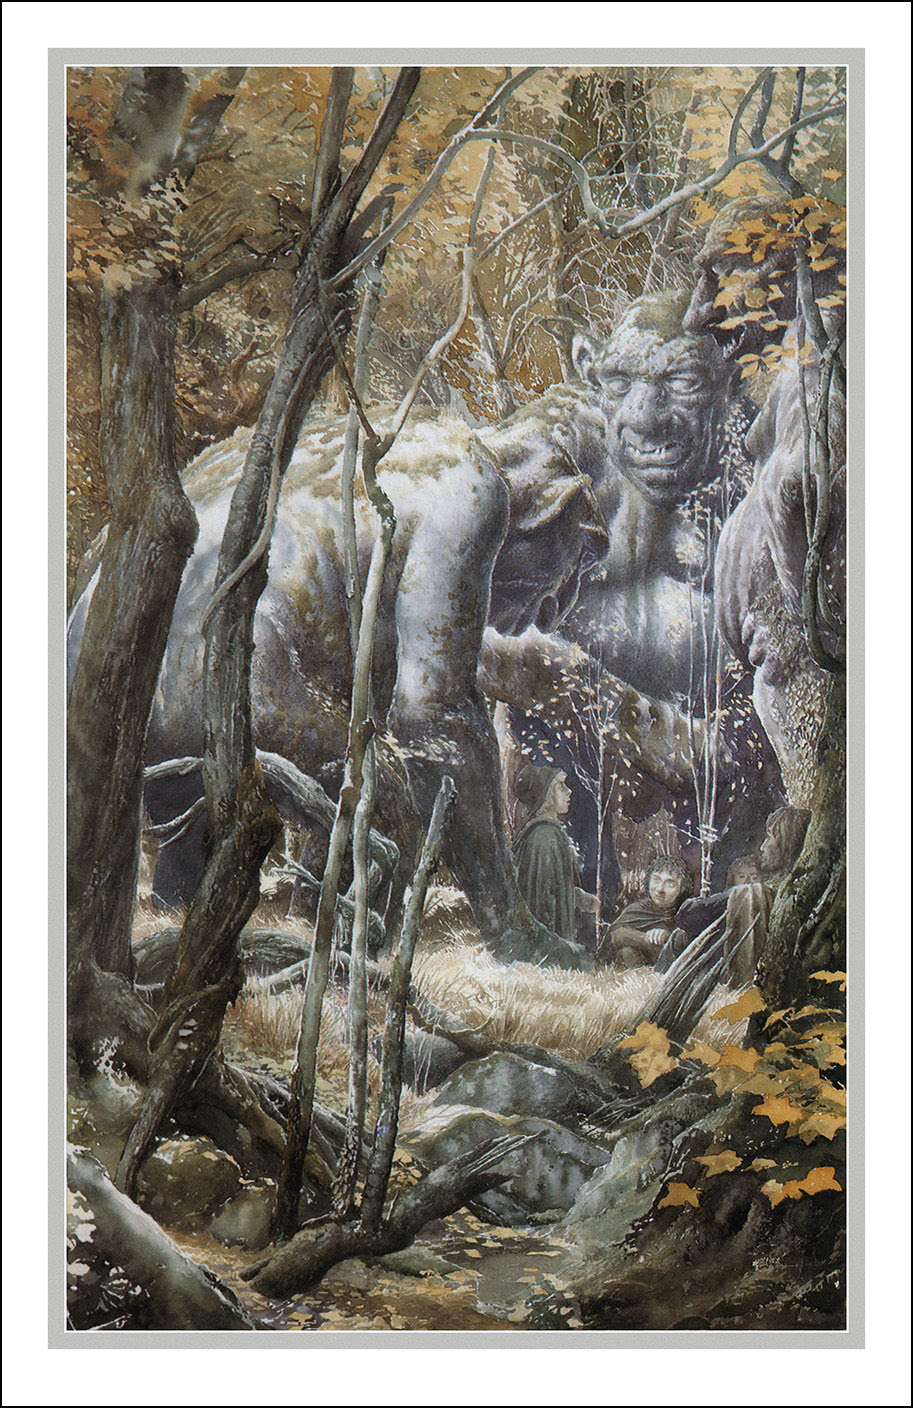  Alan Lee. THE LORD OF THE RINGS